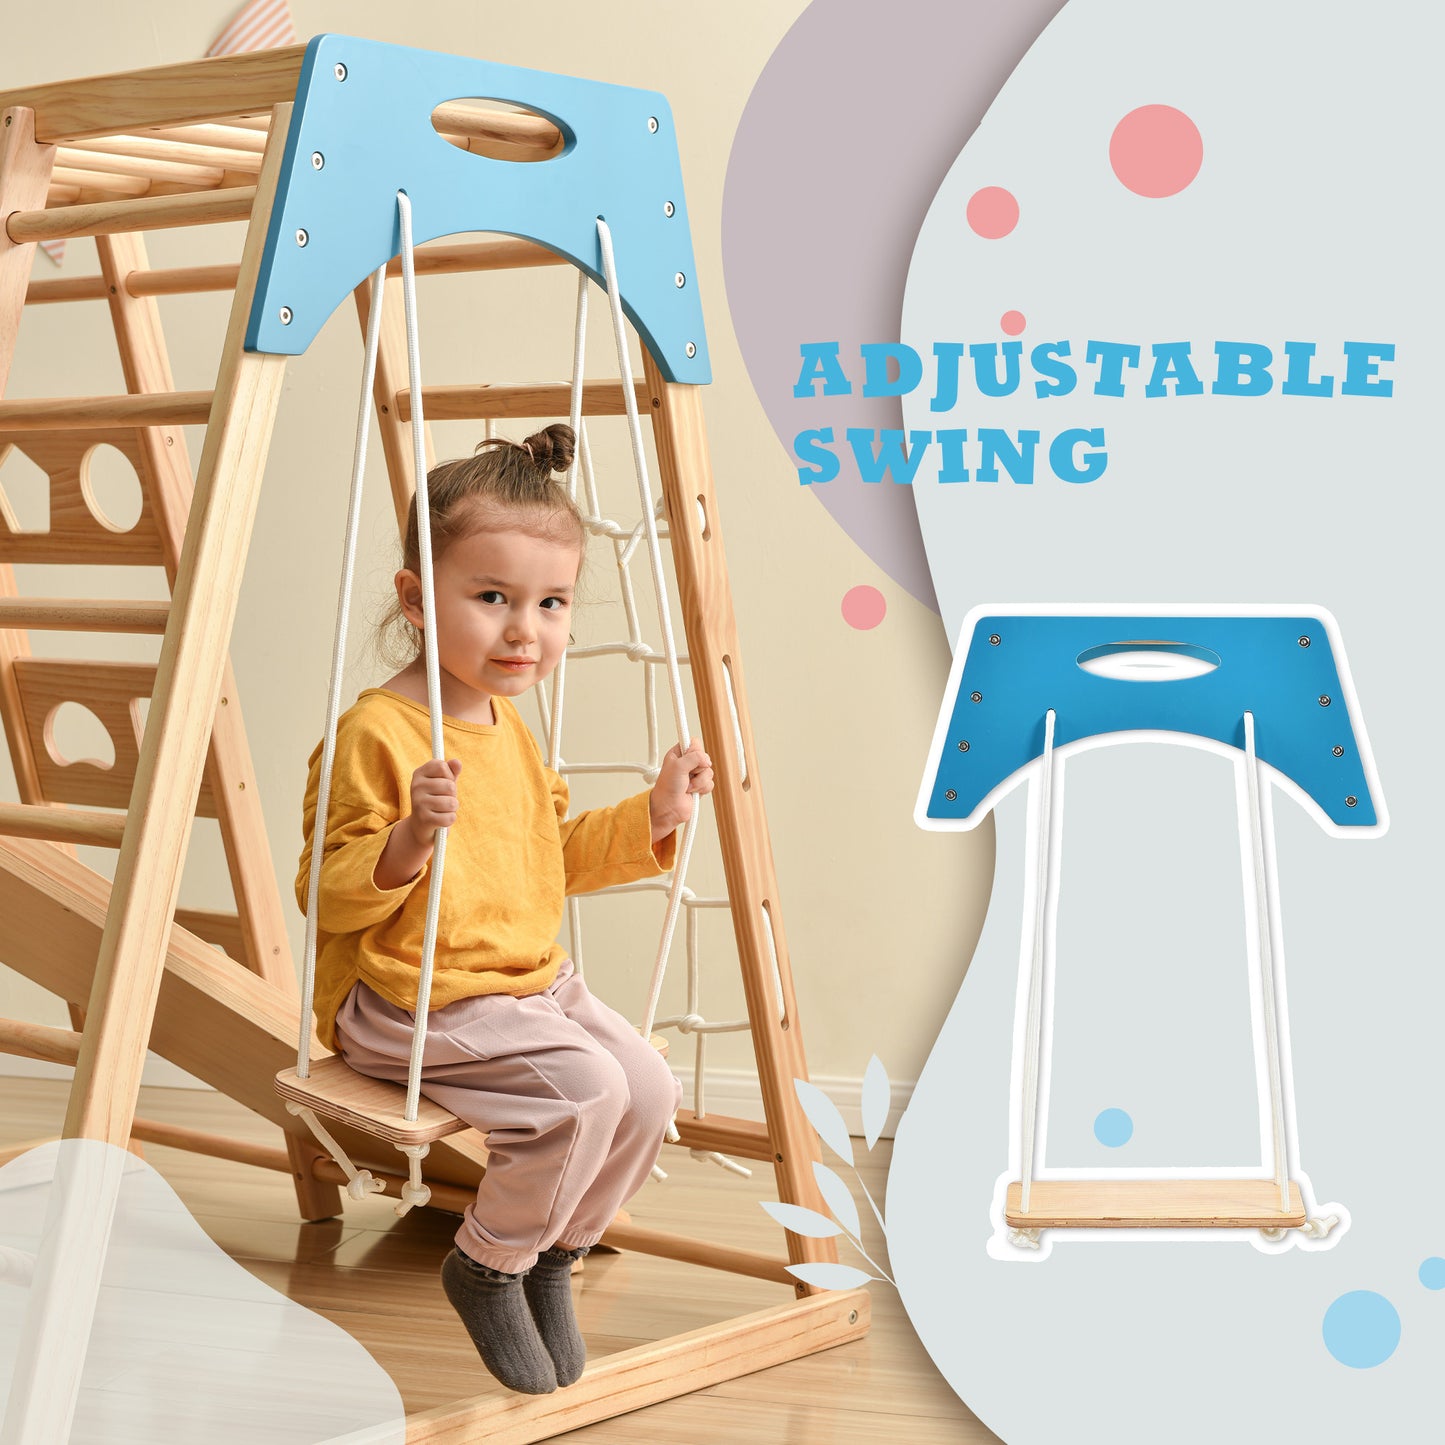 Wooden Indoor Kids Playground Jungle Gym with Slide, Toddlers Wooden Climber 8-in-1 Slide Playset, Wooden Rock Climbing Wall with Rope Wall Climb, Monkey Bars, and Swing for Kids